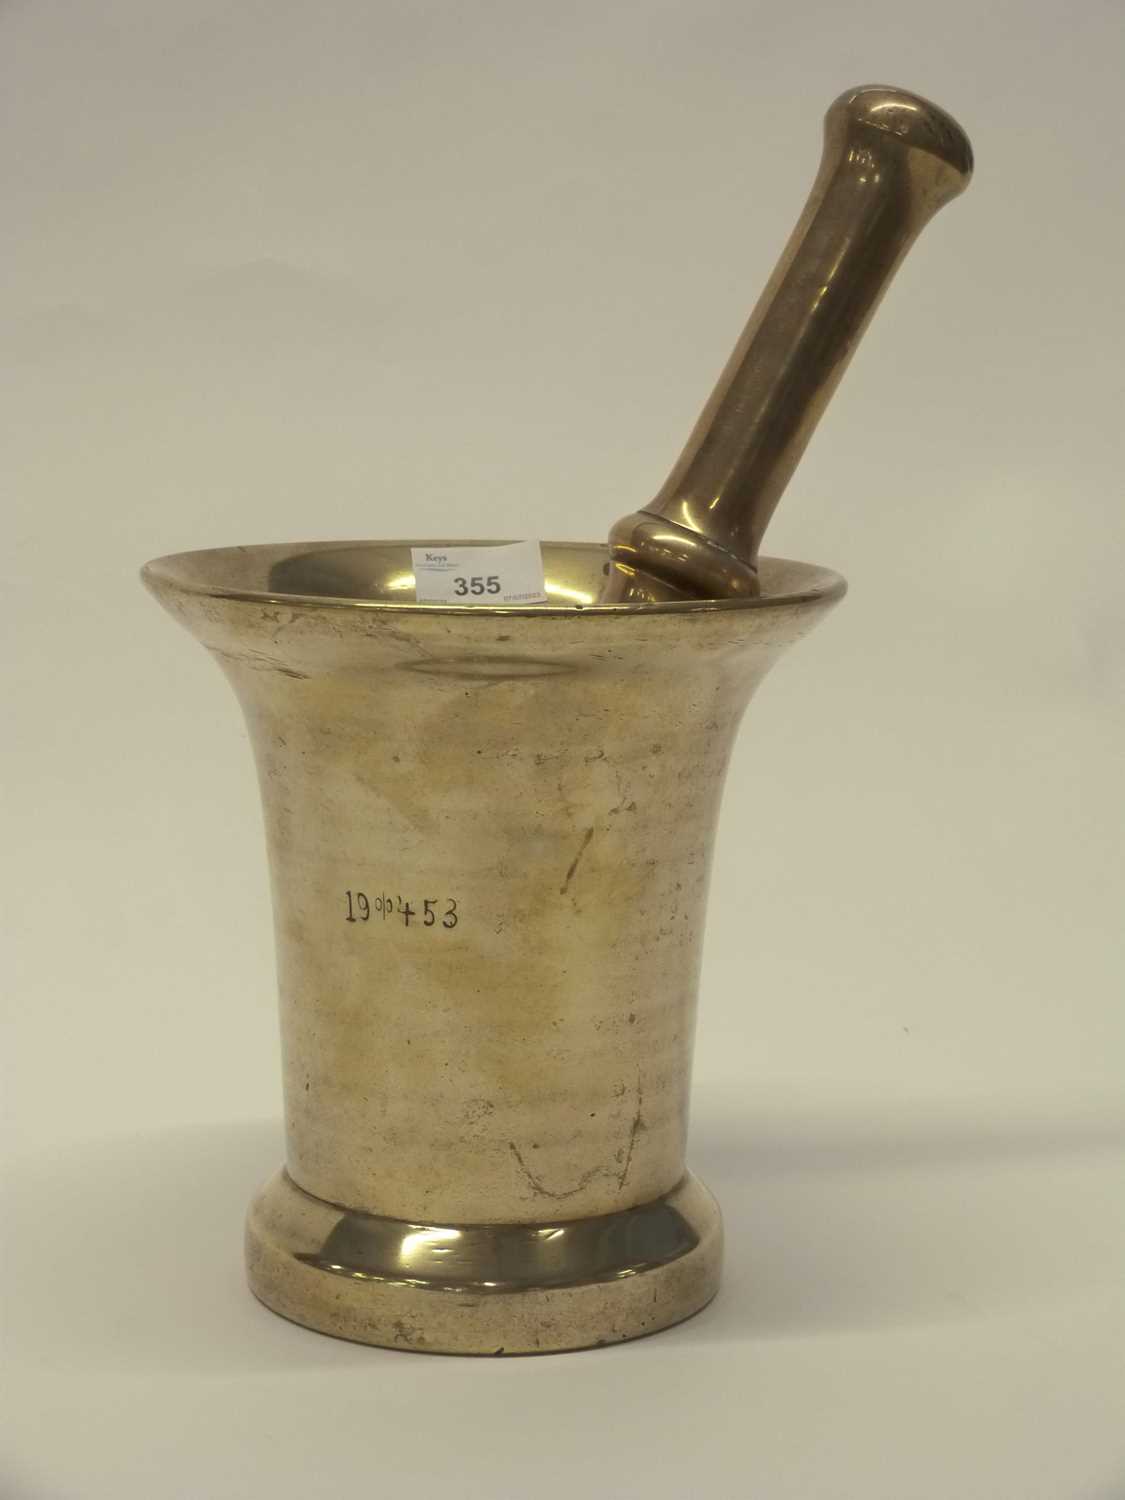 Large heavy brass mortar and pestle